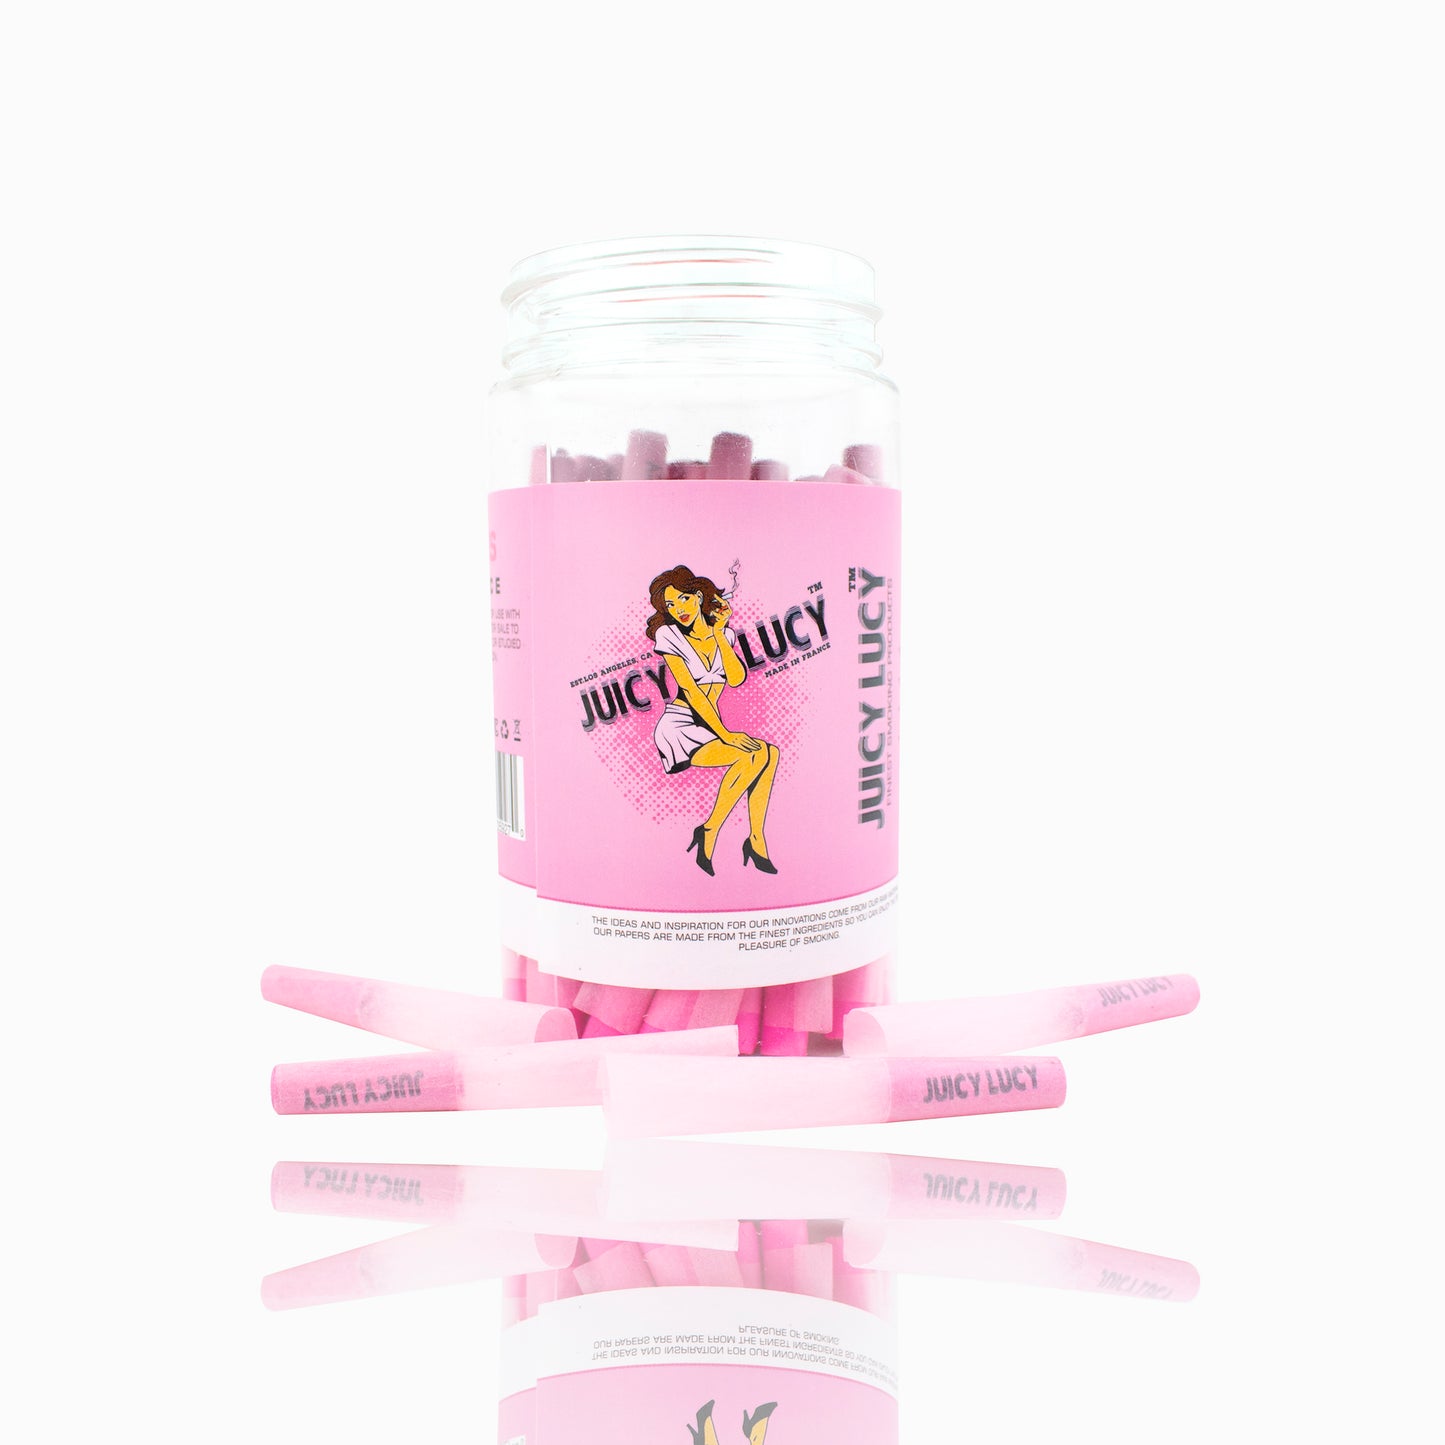 STOKES Juicy Lucy Pink 53mm (Jar 50ct)